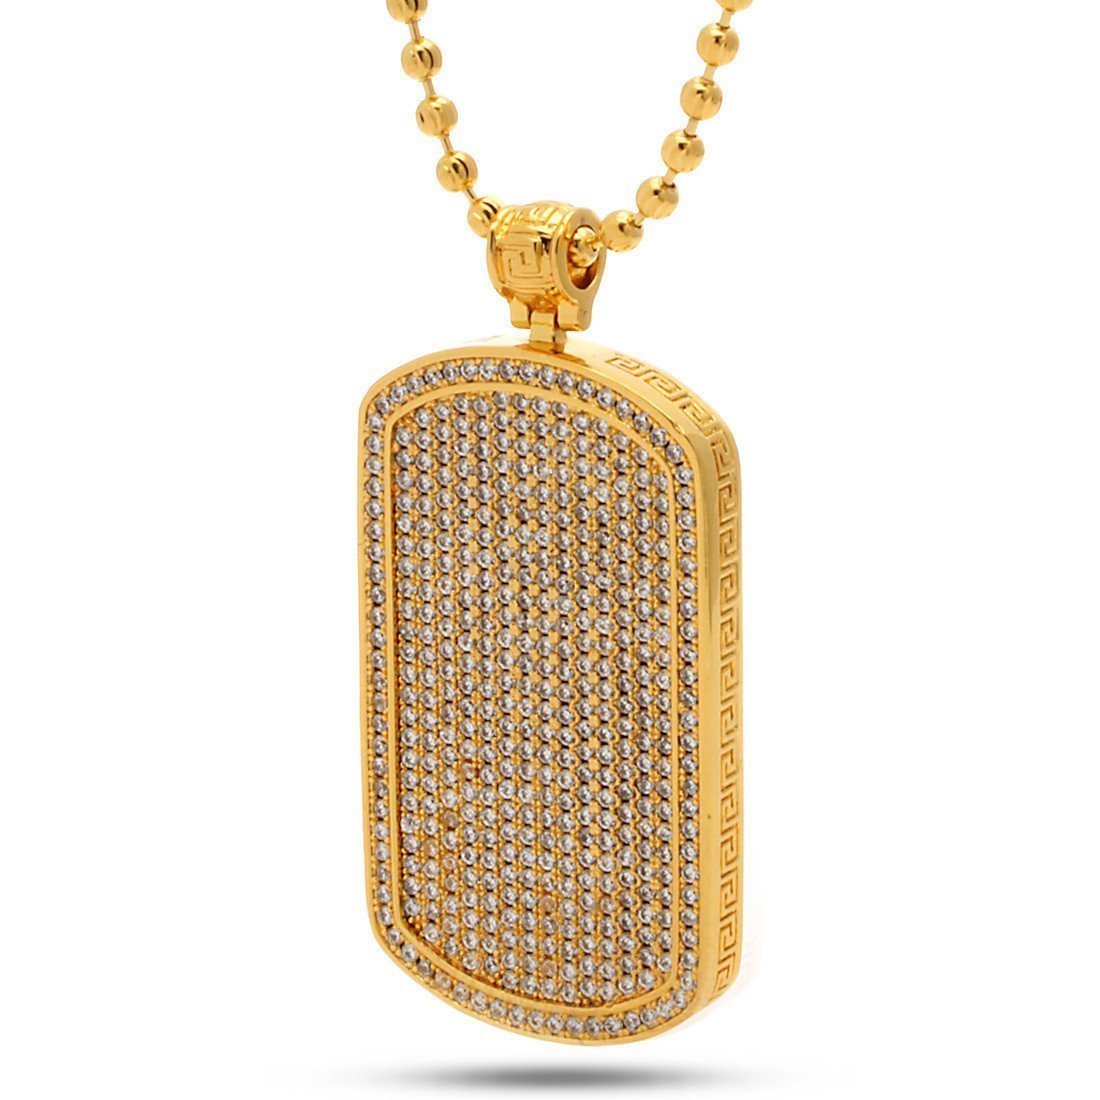 The Gold Dog Tag Necklace - Designed by Snoop Dogg x King Ice